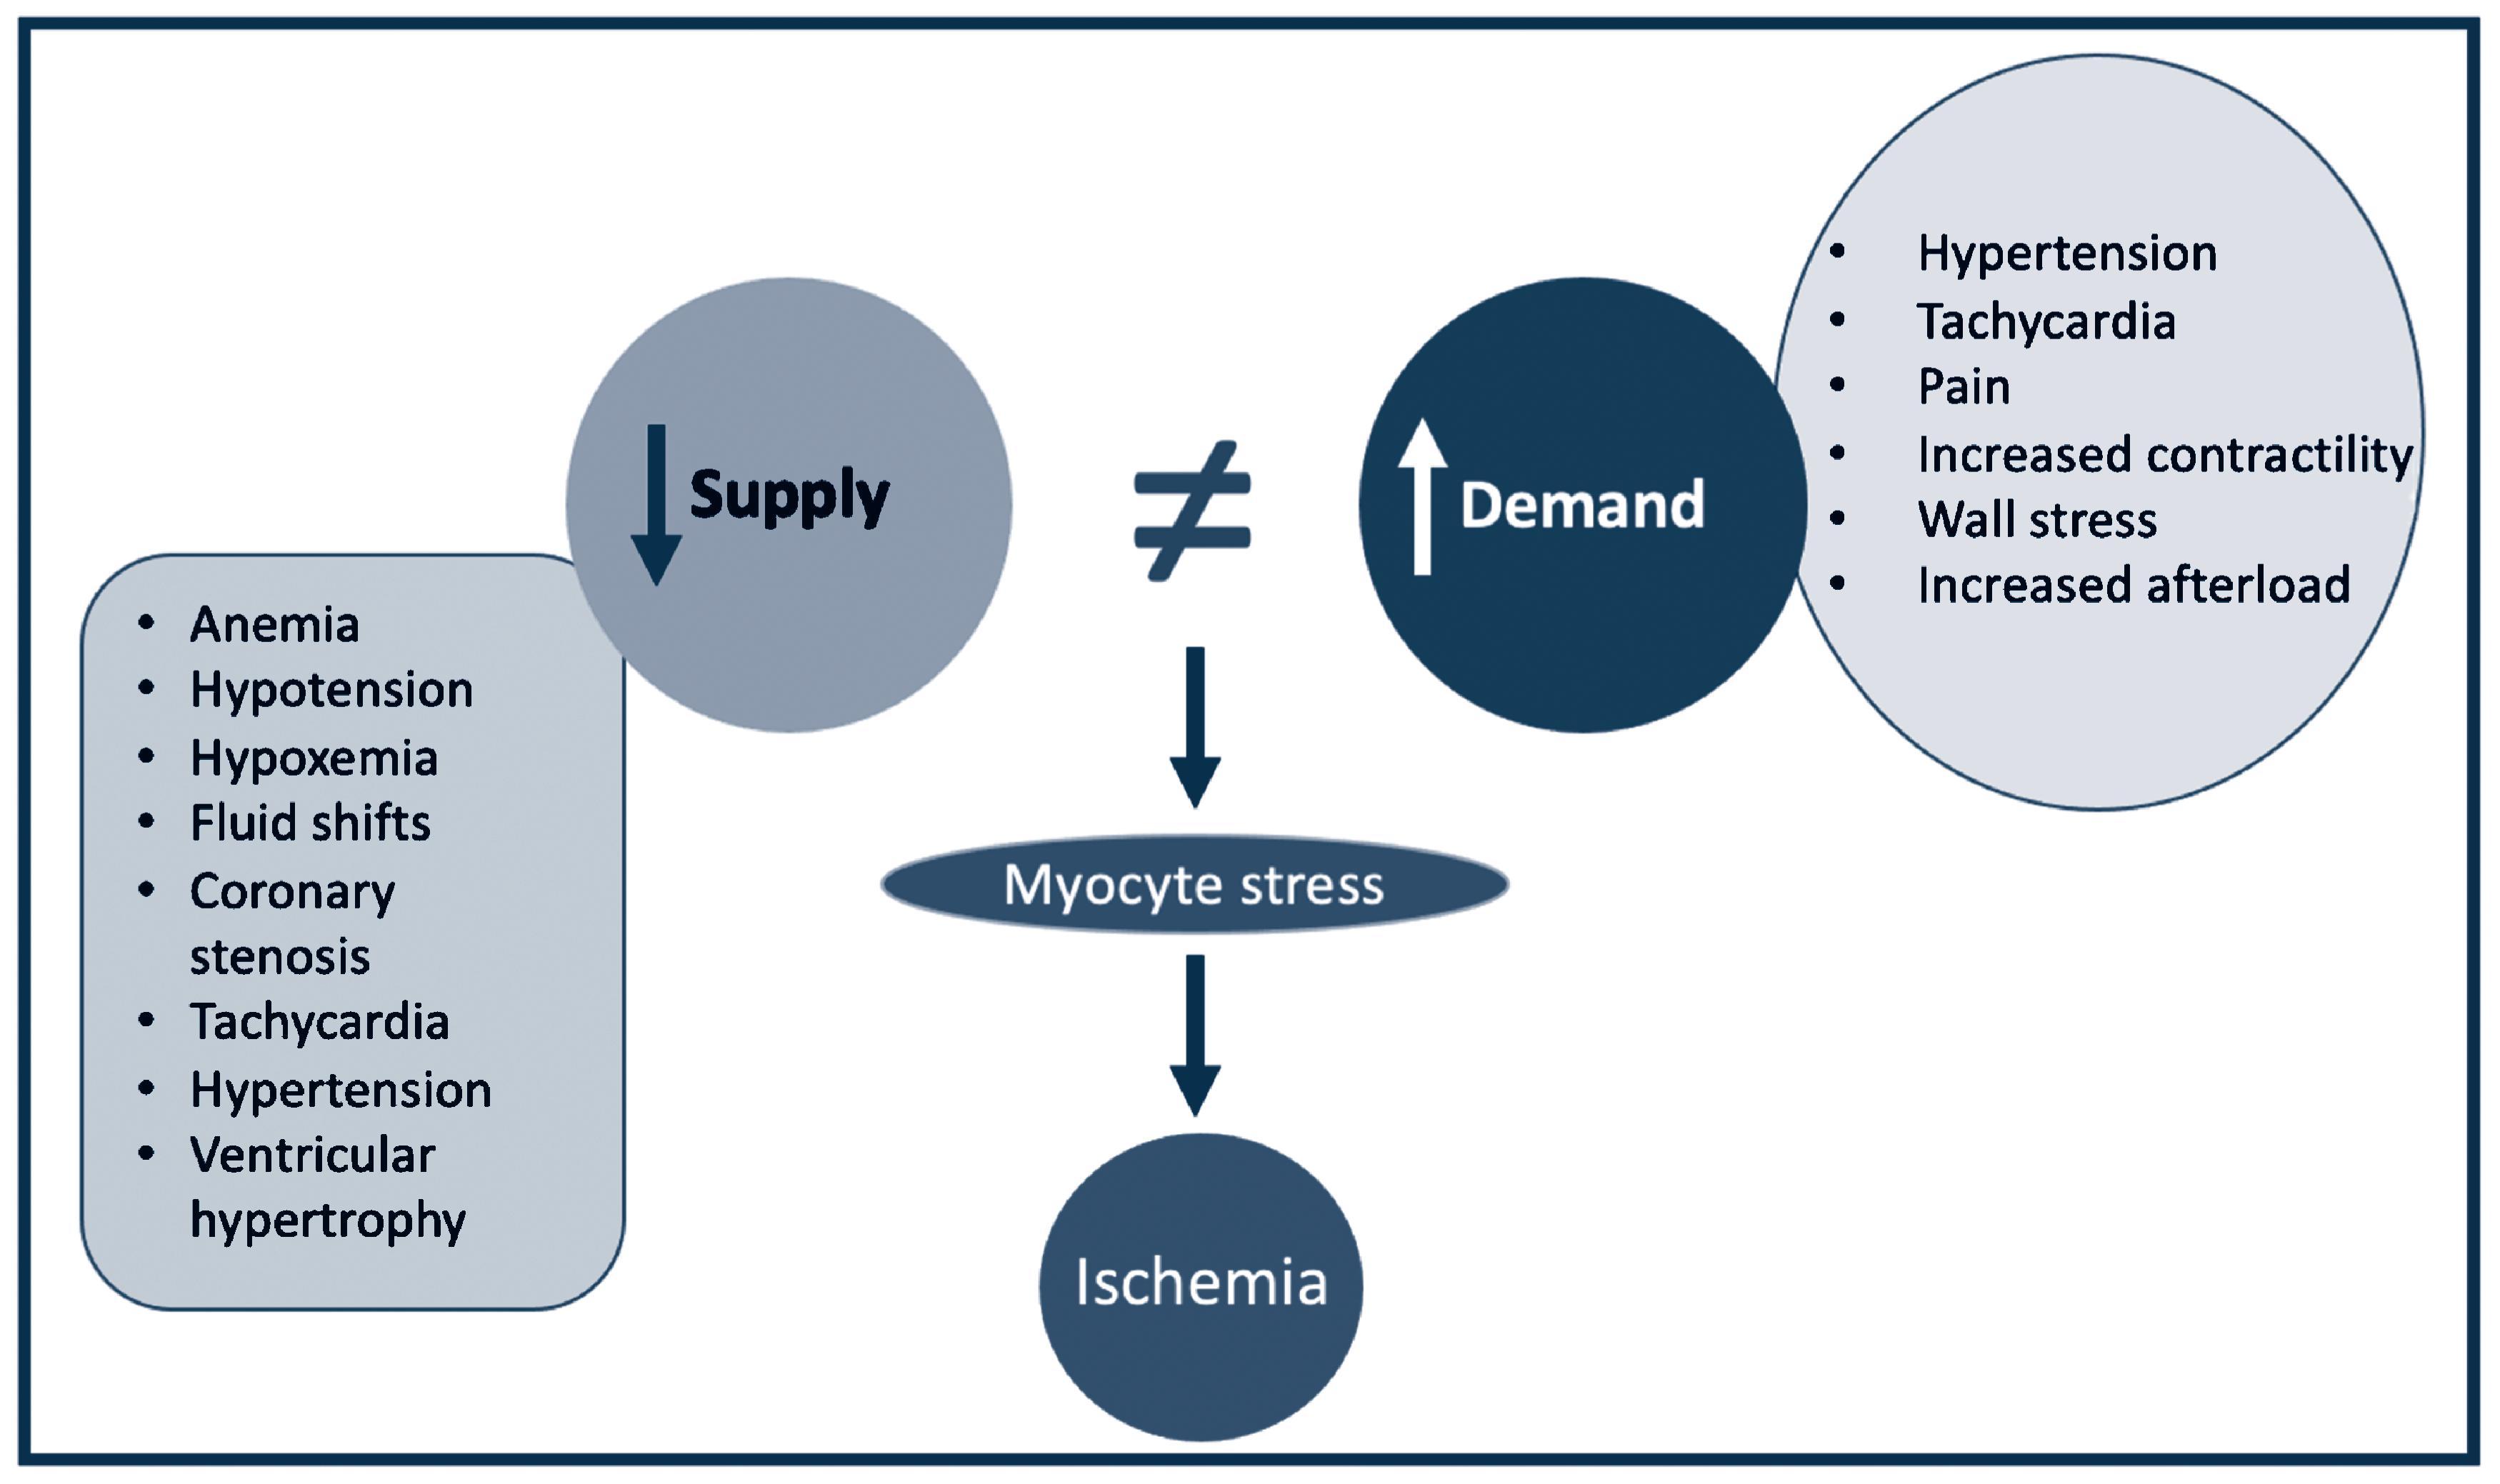 Fig. 62.1, Myocardial supply demand physiology is determined by a complex interplay of factors with occasionally conflicting impacts. Some examples: Hypertension can increase O 2 demand through increased afterload but increased diastolic pressure may improve O 2 supply. Tachycardia certainly increases O 2 consumption per minute but on the arguably more important per beat frame, tachycardia decreases diastolic perfusion time. Left ventricular hypertrophy may associate with increase O 2 consumption while attenuating diastolic flow because of muscle thickness.